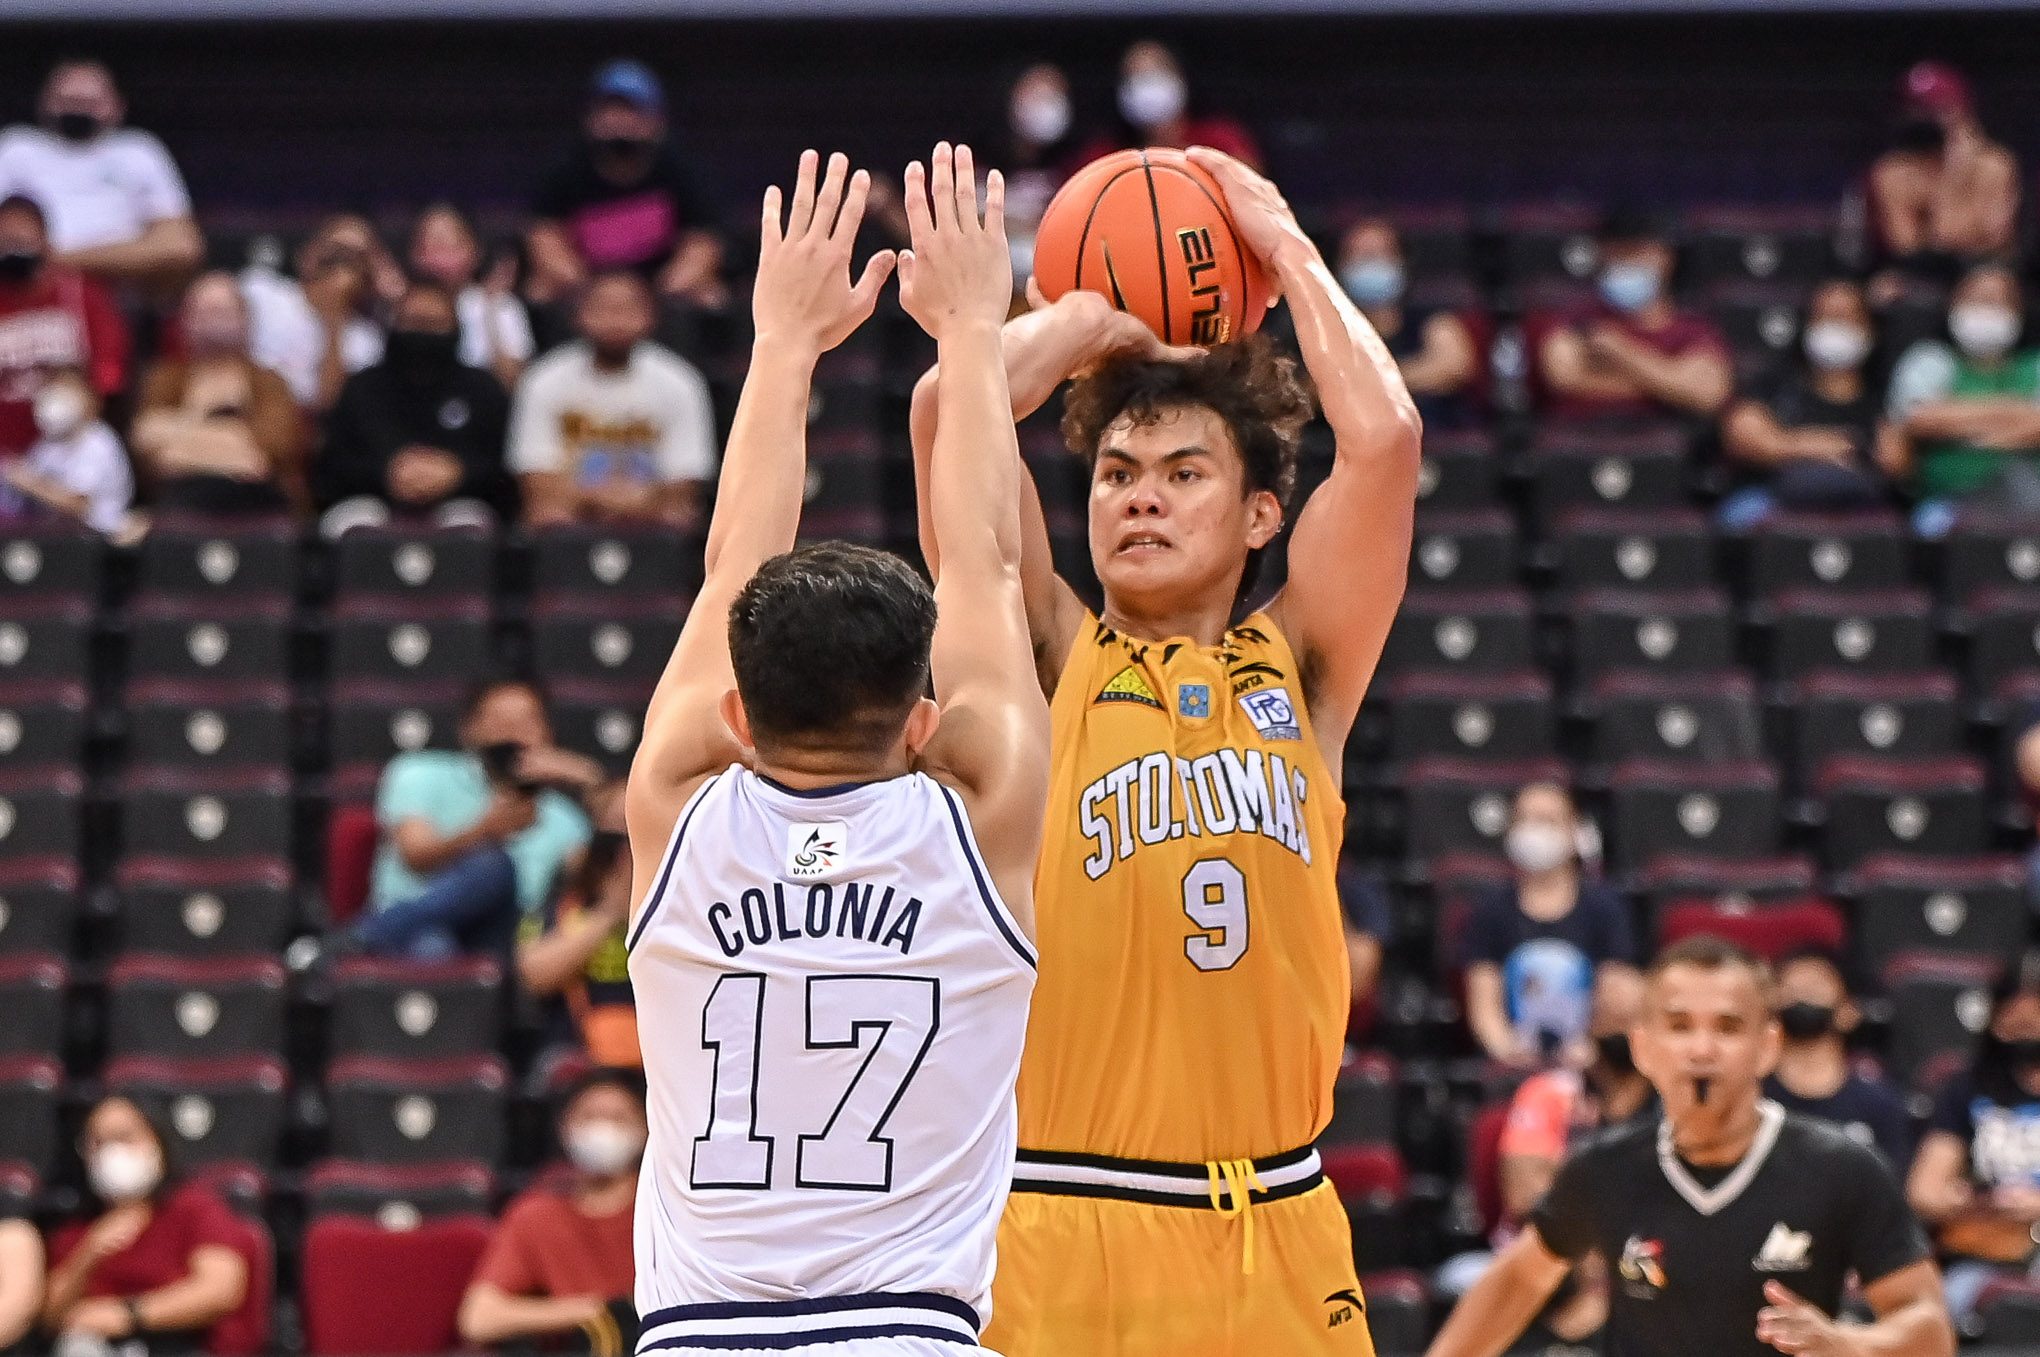 Cabañero explodes for 33 as UST stuns Adamson to open UAAP Season 85